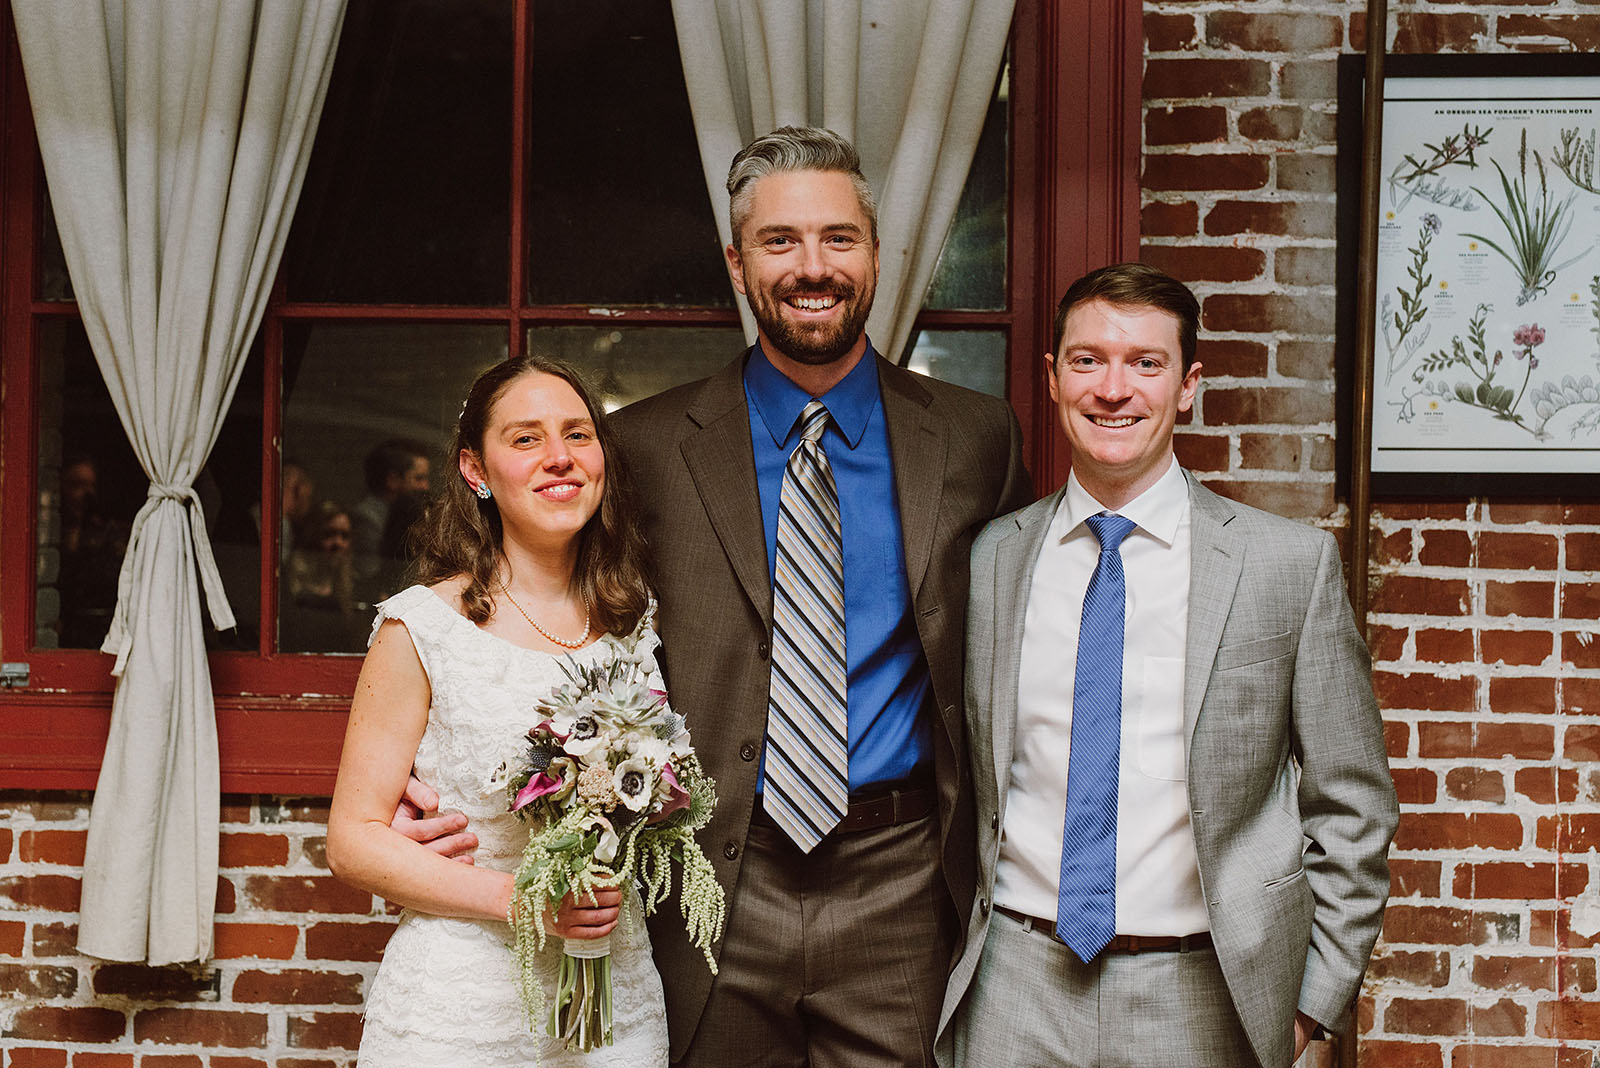 Portrait of bride and groom with their officiant at an Intimate Restaurant Wedding in Portland, OR